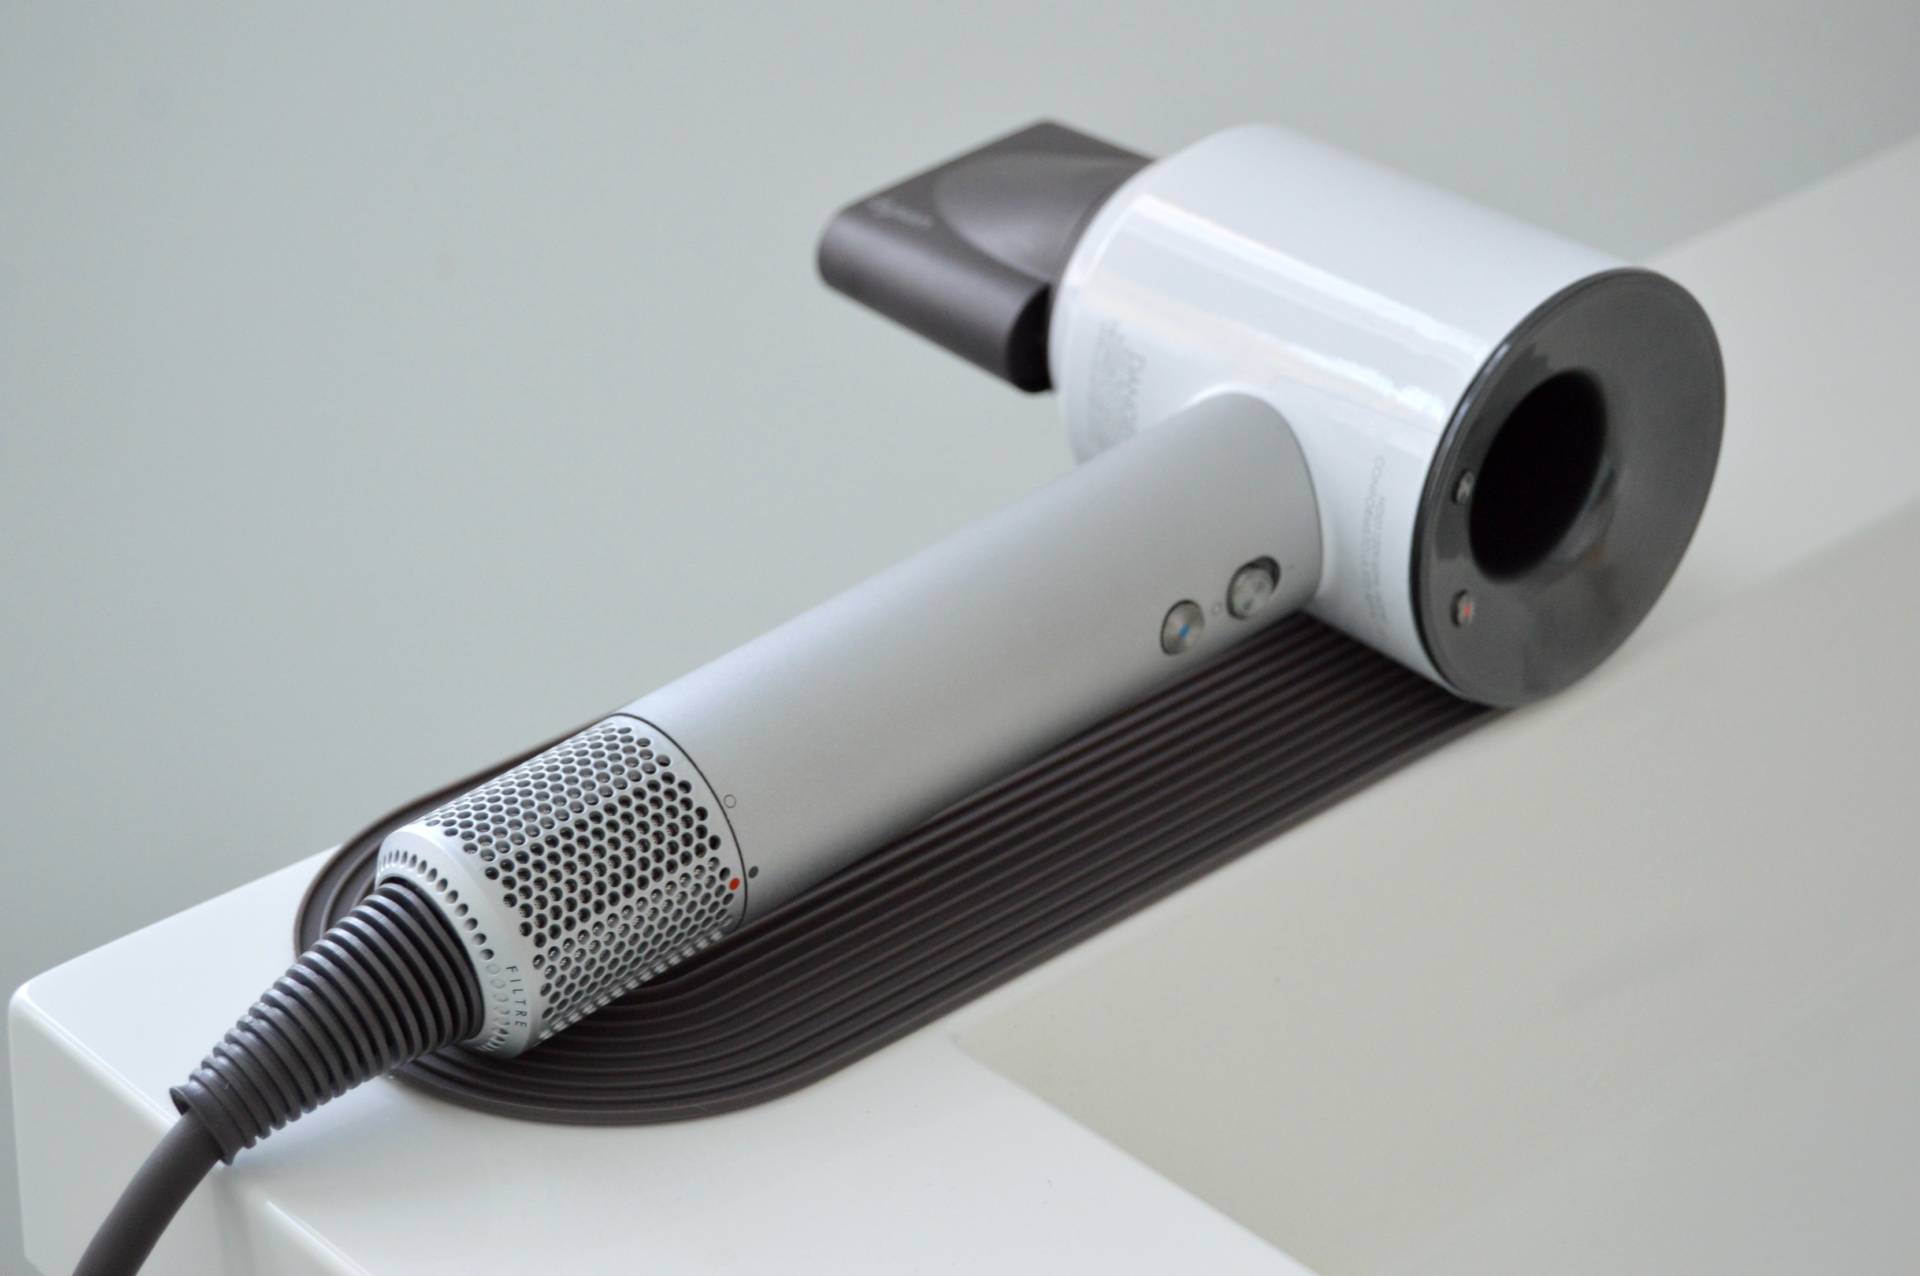 Dyson Supersonic Is The 399 Hair Dryer All That OMGBART